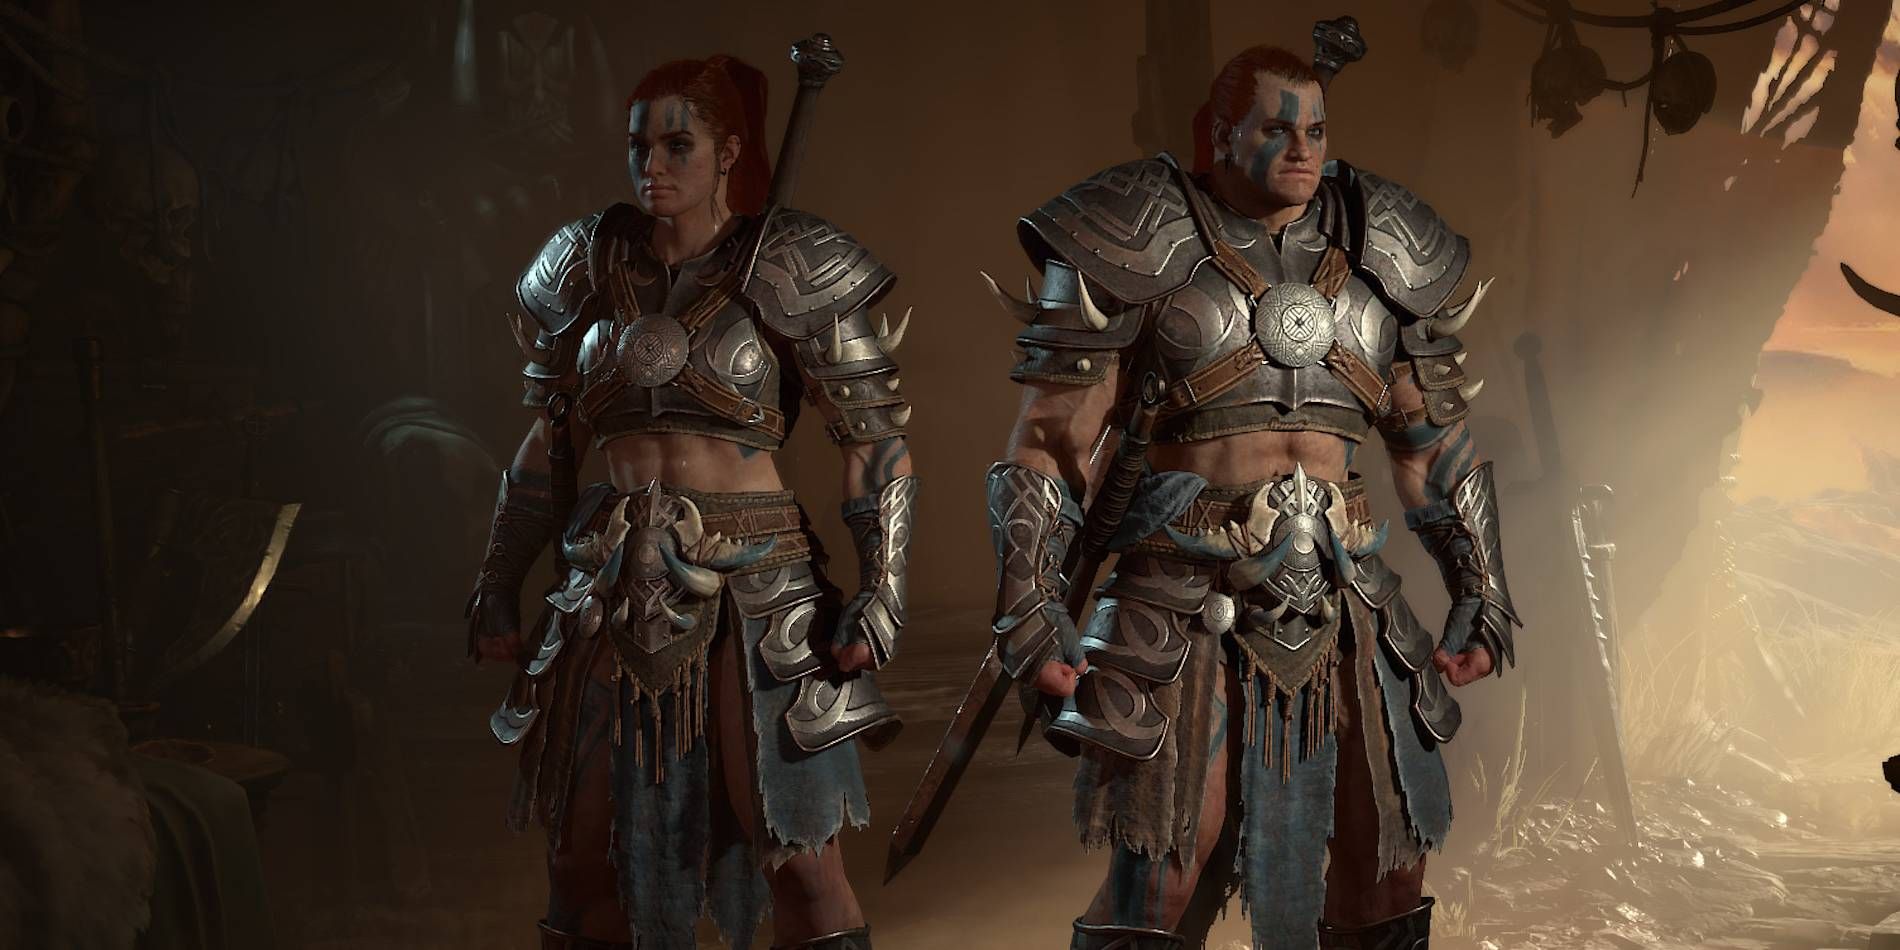 The two default appearances for the Barbarian class in Diablo 4, one feminine and the other masculine.